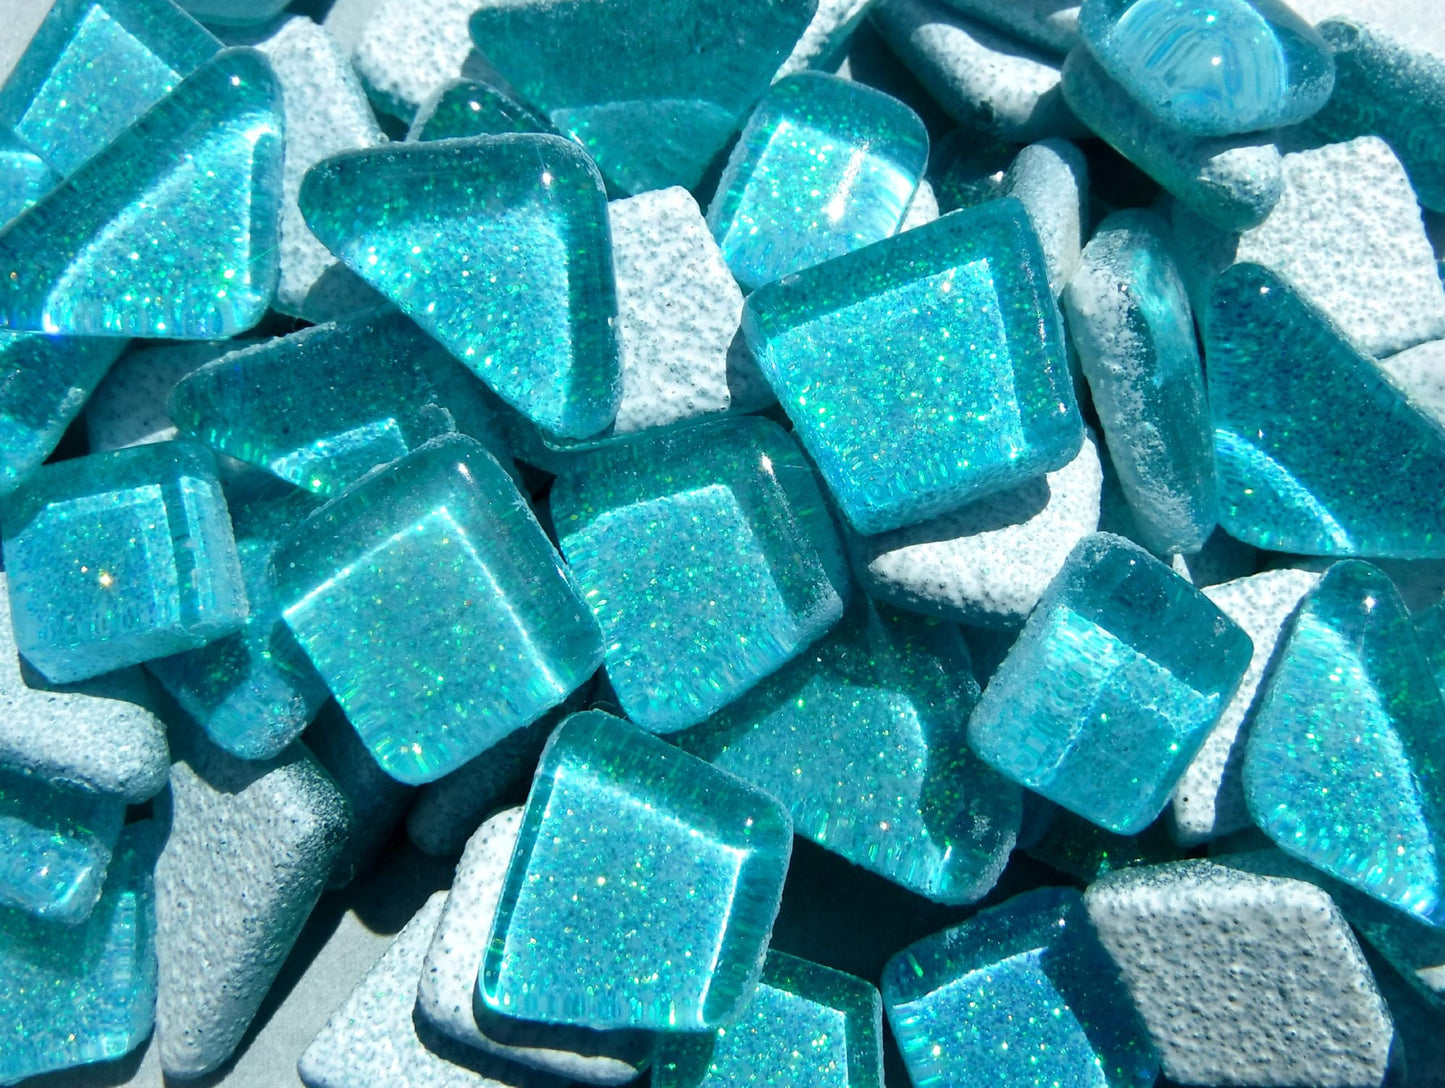 Poolside Blue Glitter Puzzle Tiles - 100 grams in Assorted Shapes Glass Mosaic Tiles